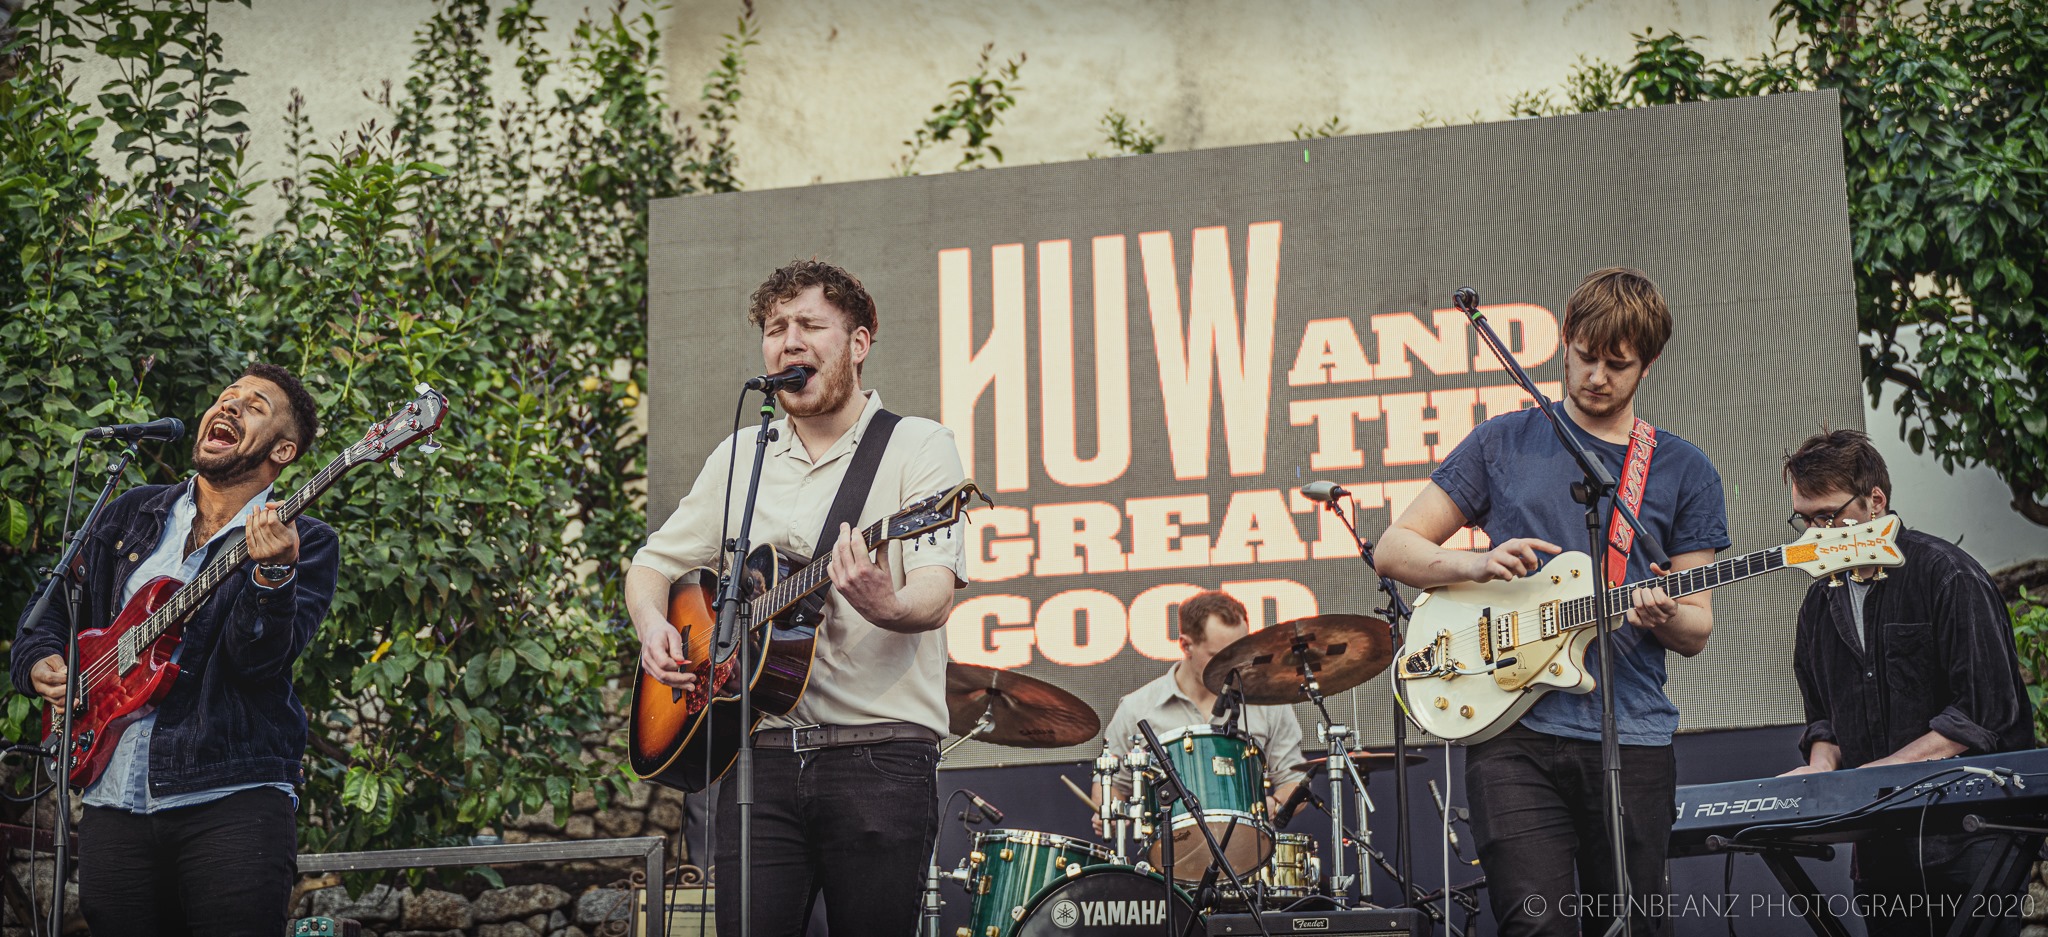 Huw and the Greater Good at the Eden Project in February 2020